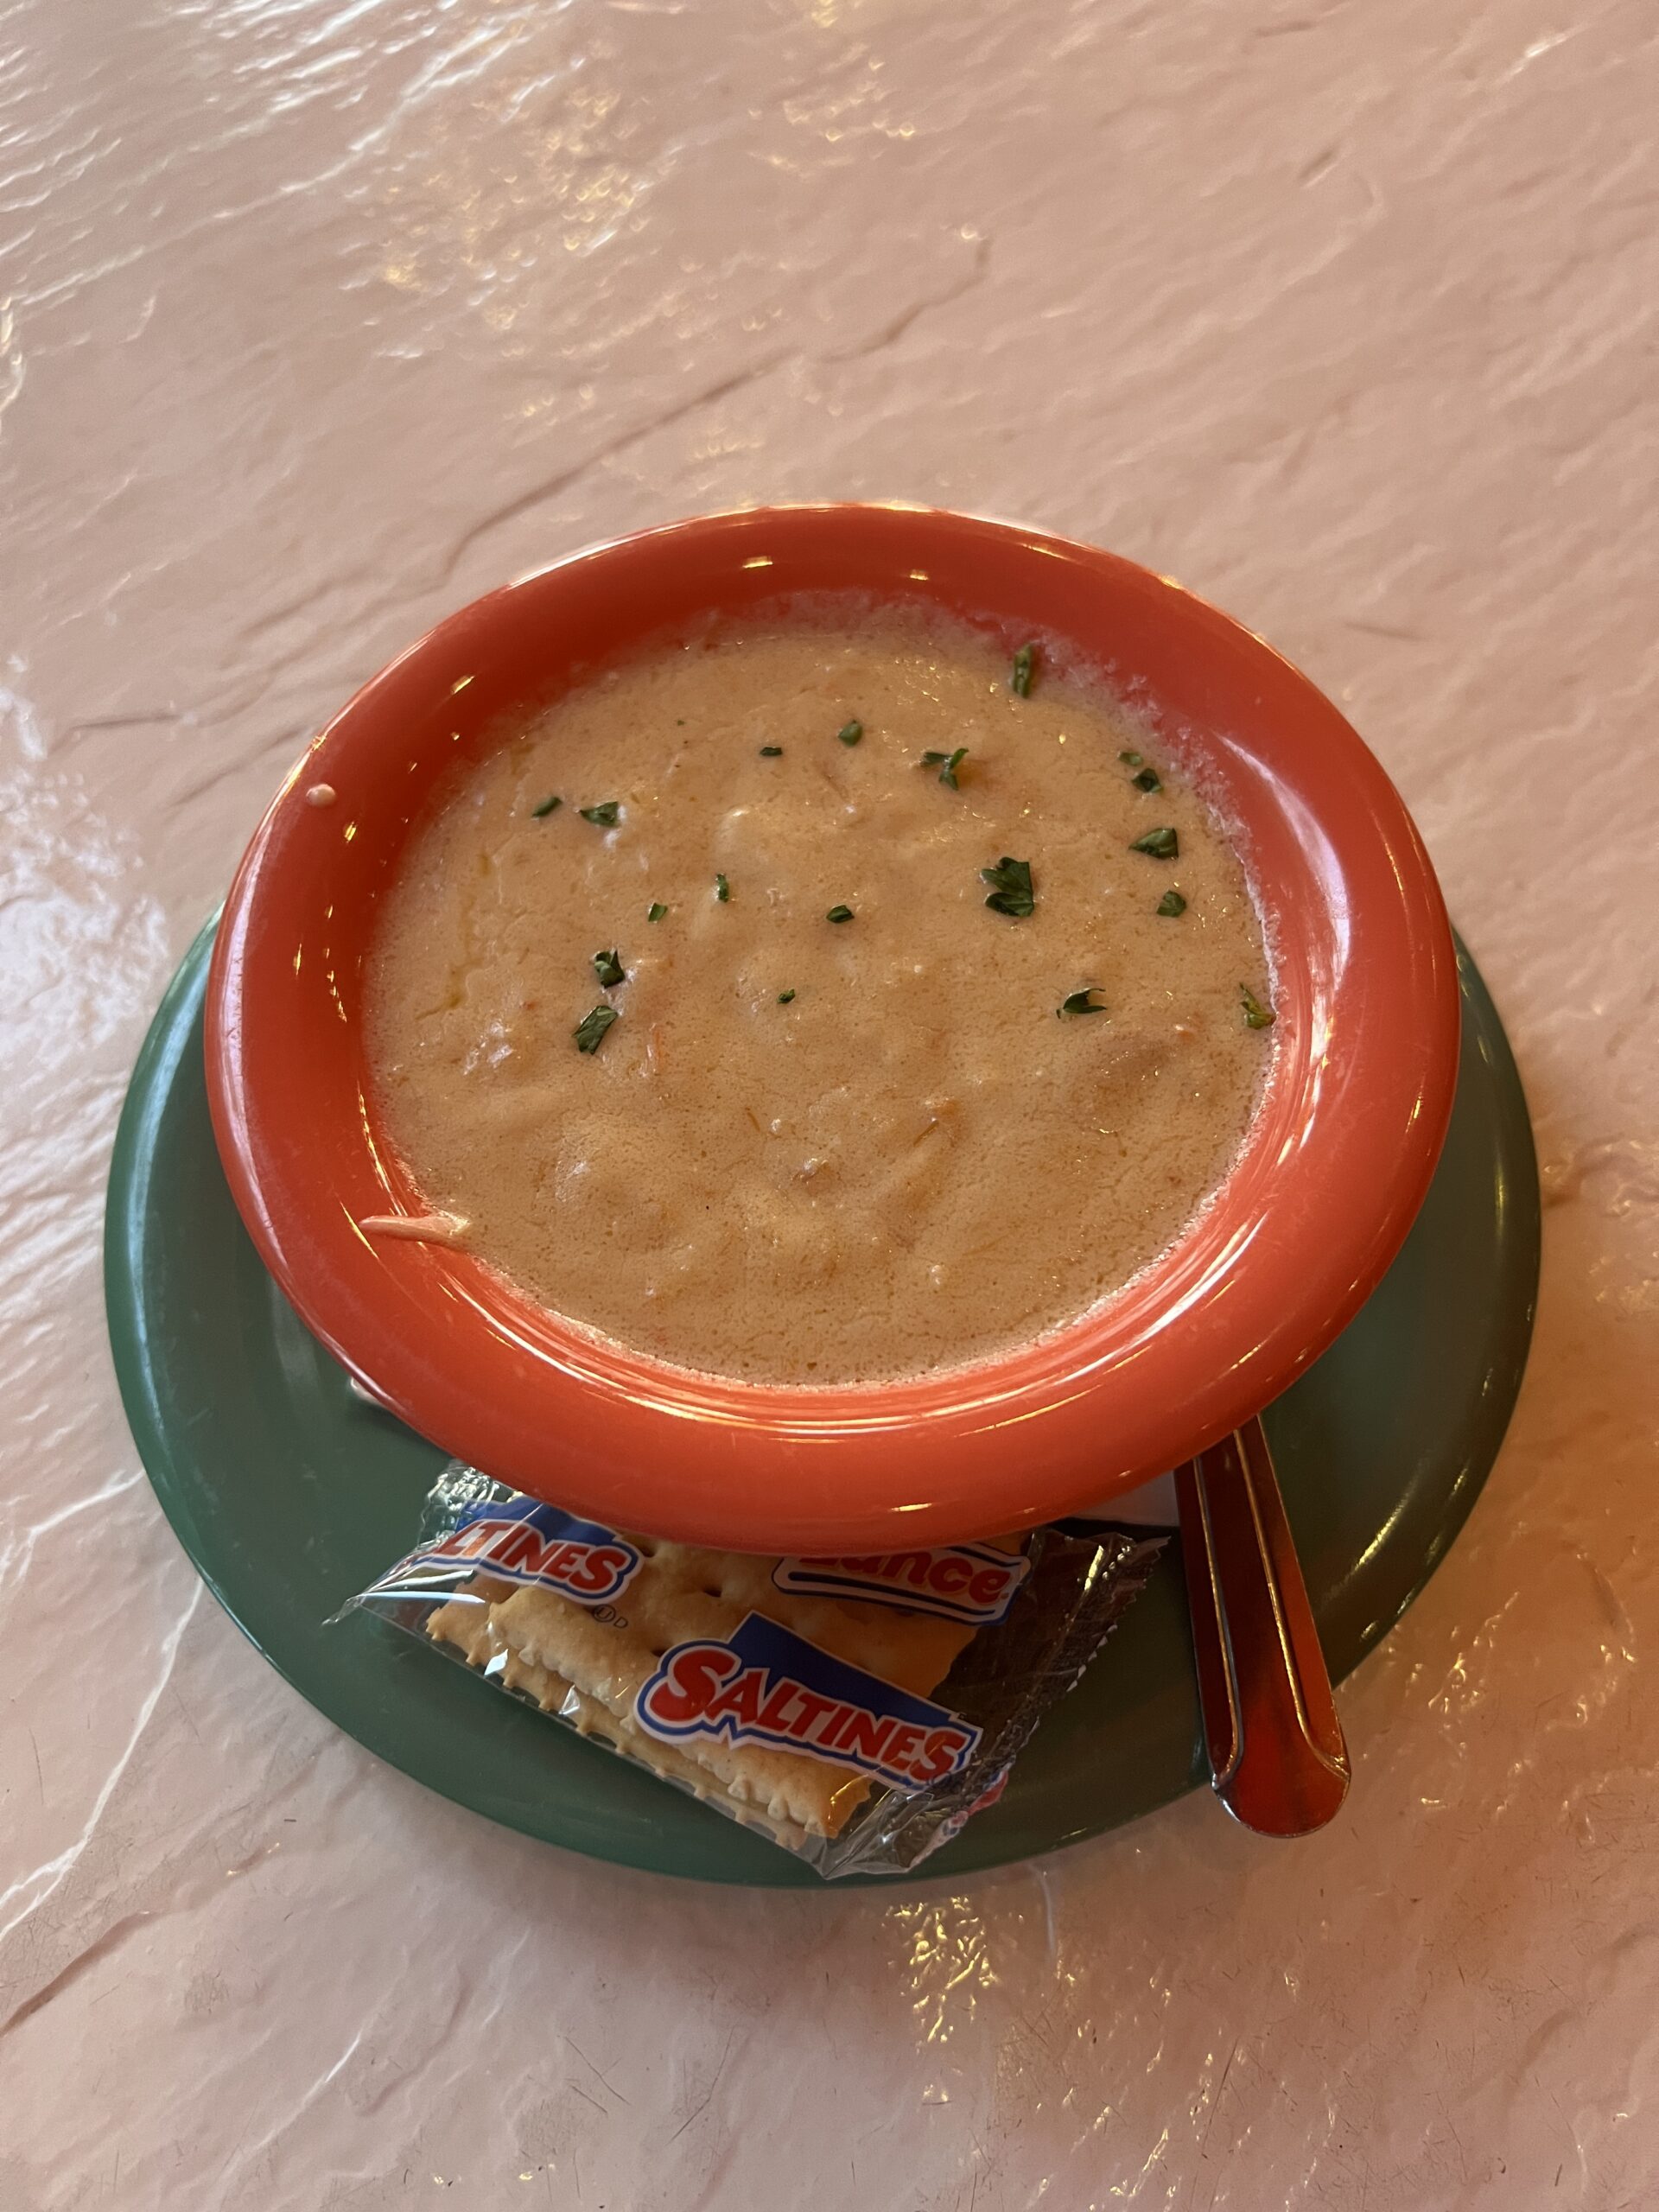 Frenchy's She Crab Soup